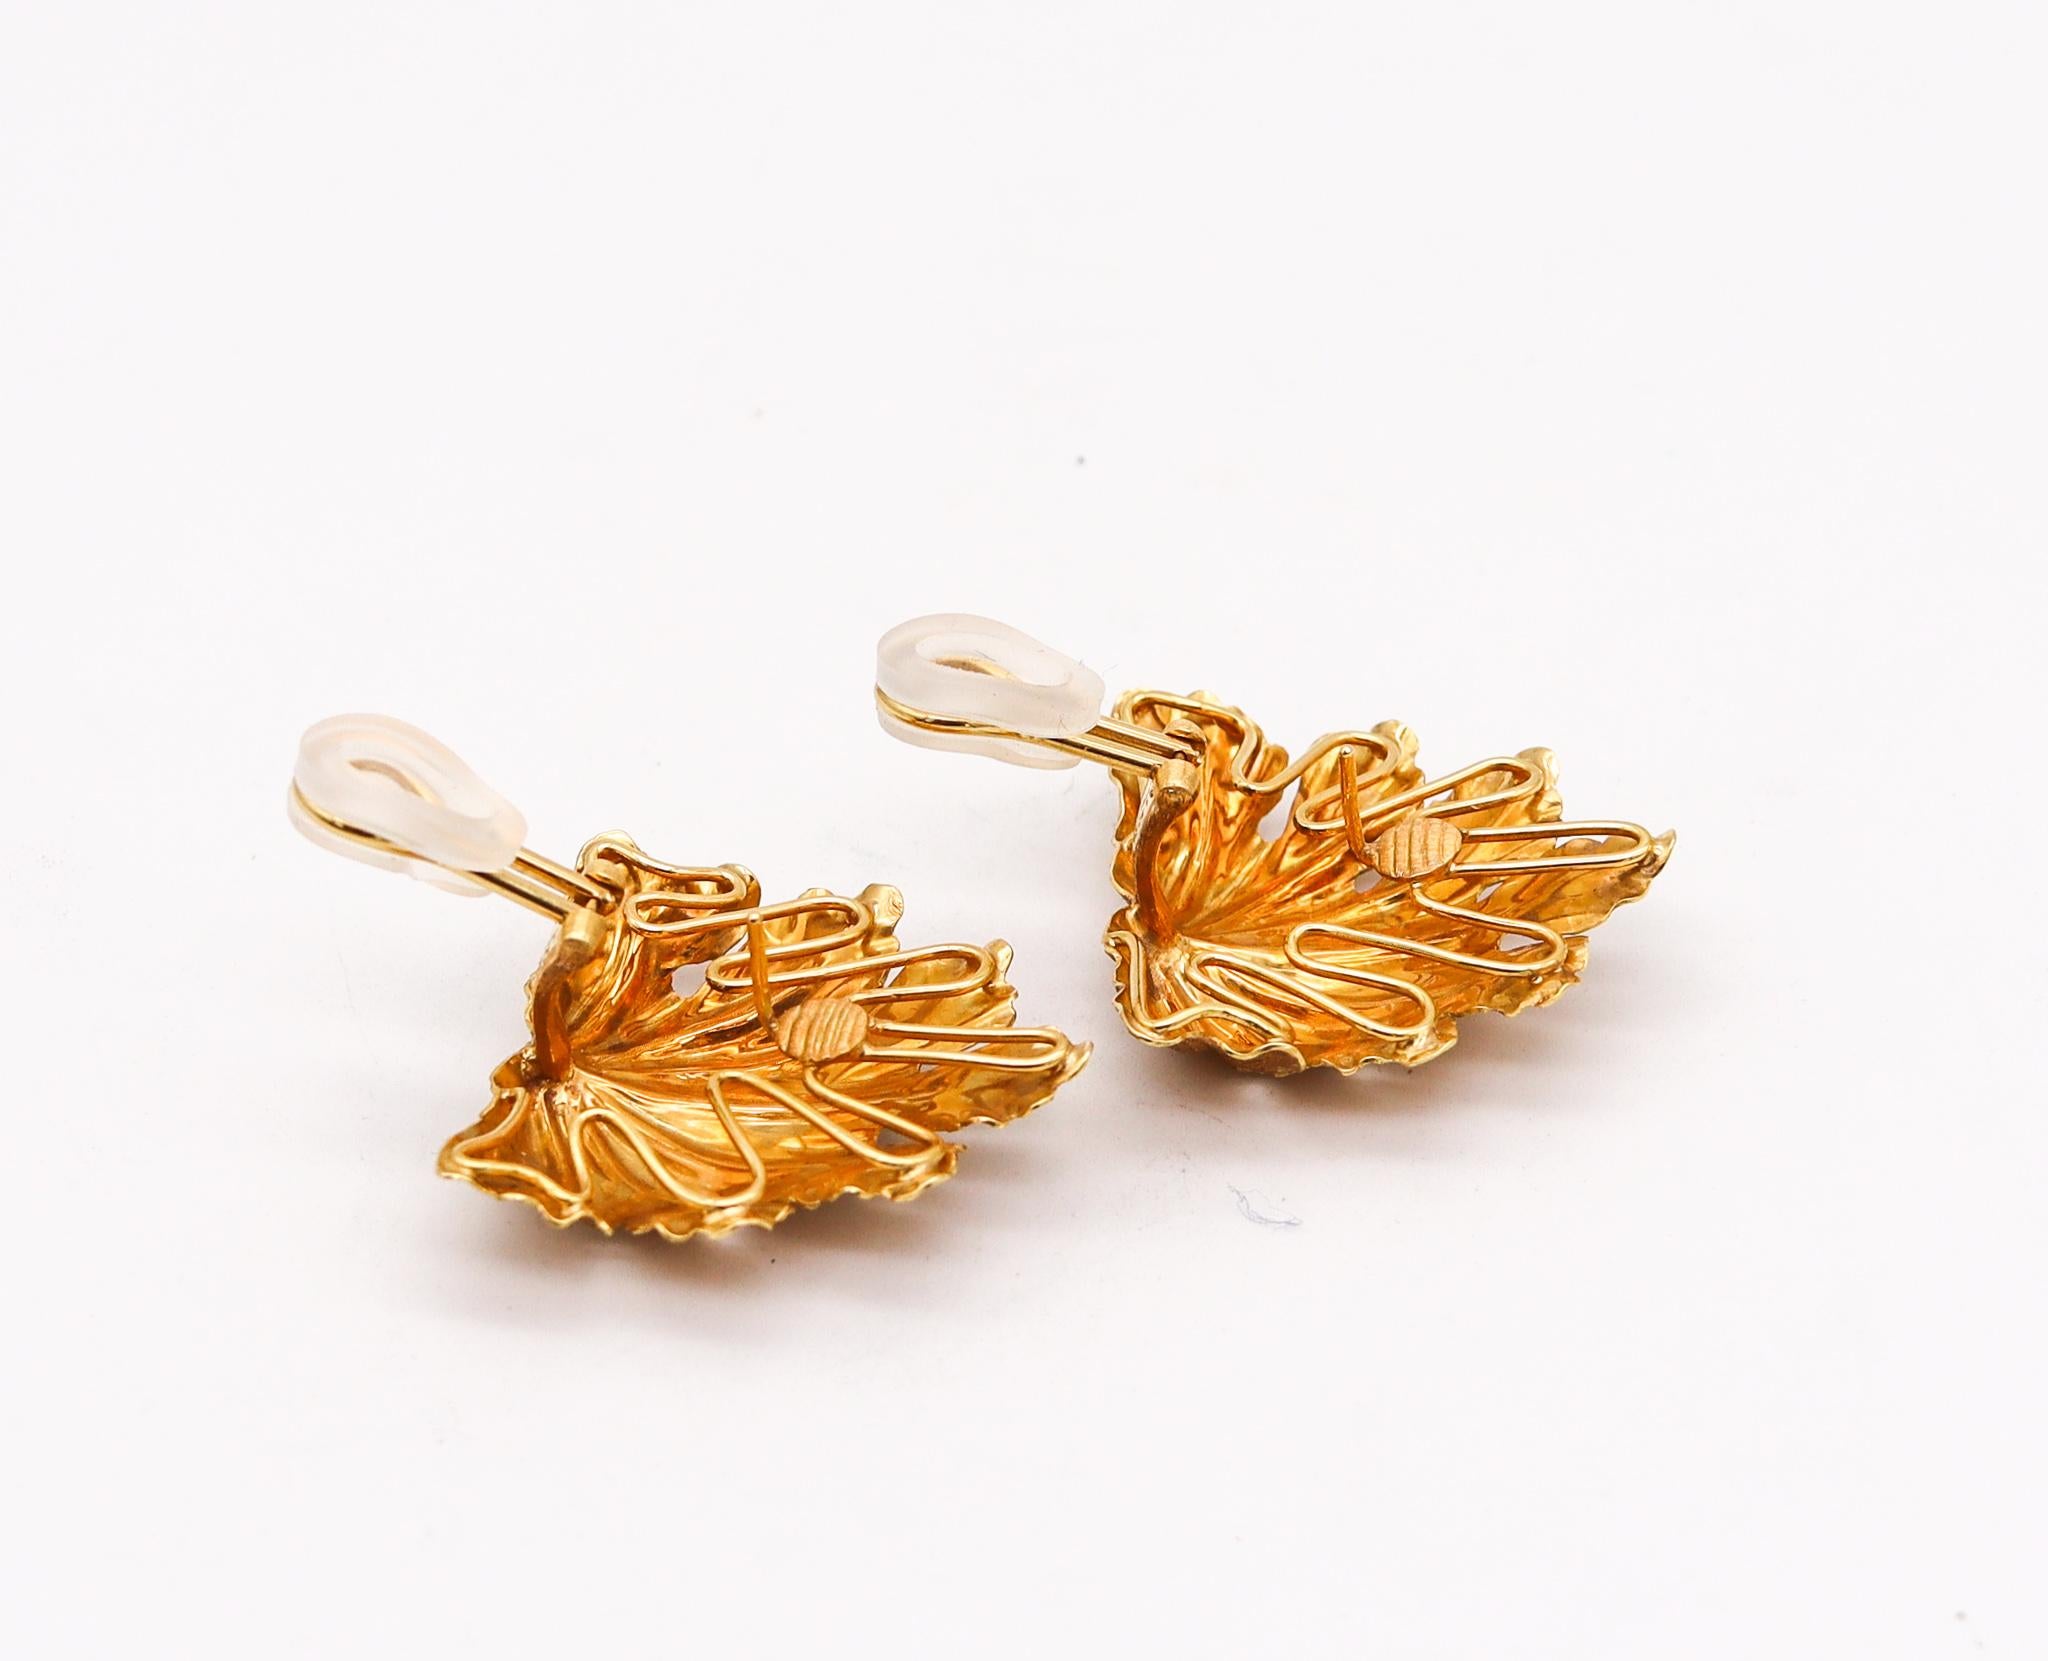 Baroque Mario Buccellati 1970 Oversized Leafs Clips Earrings Textured 18kt Yellow Gold For Sale